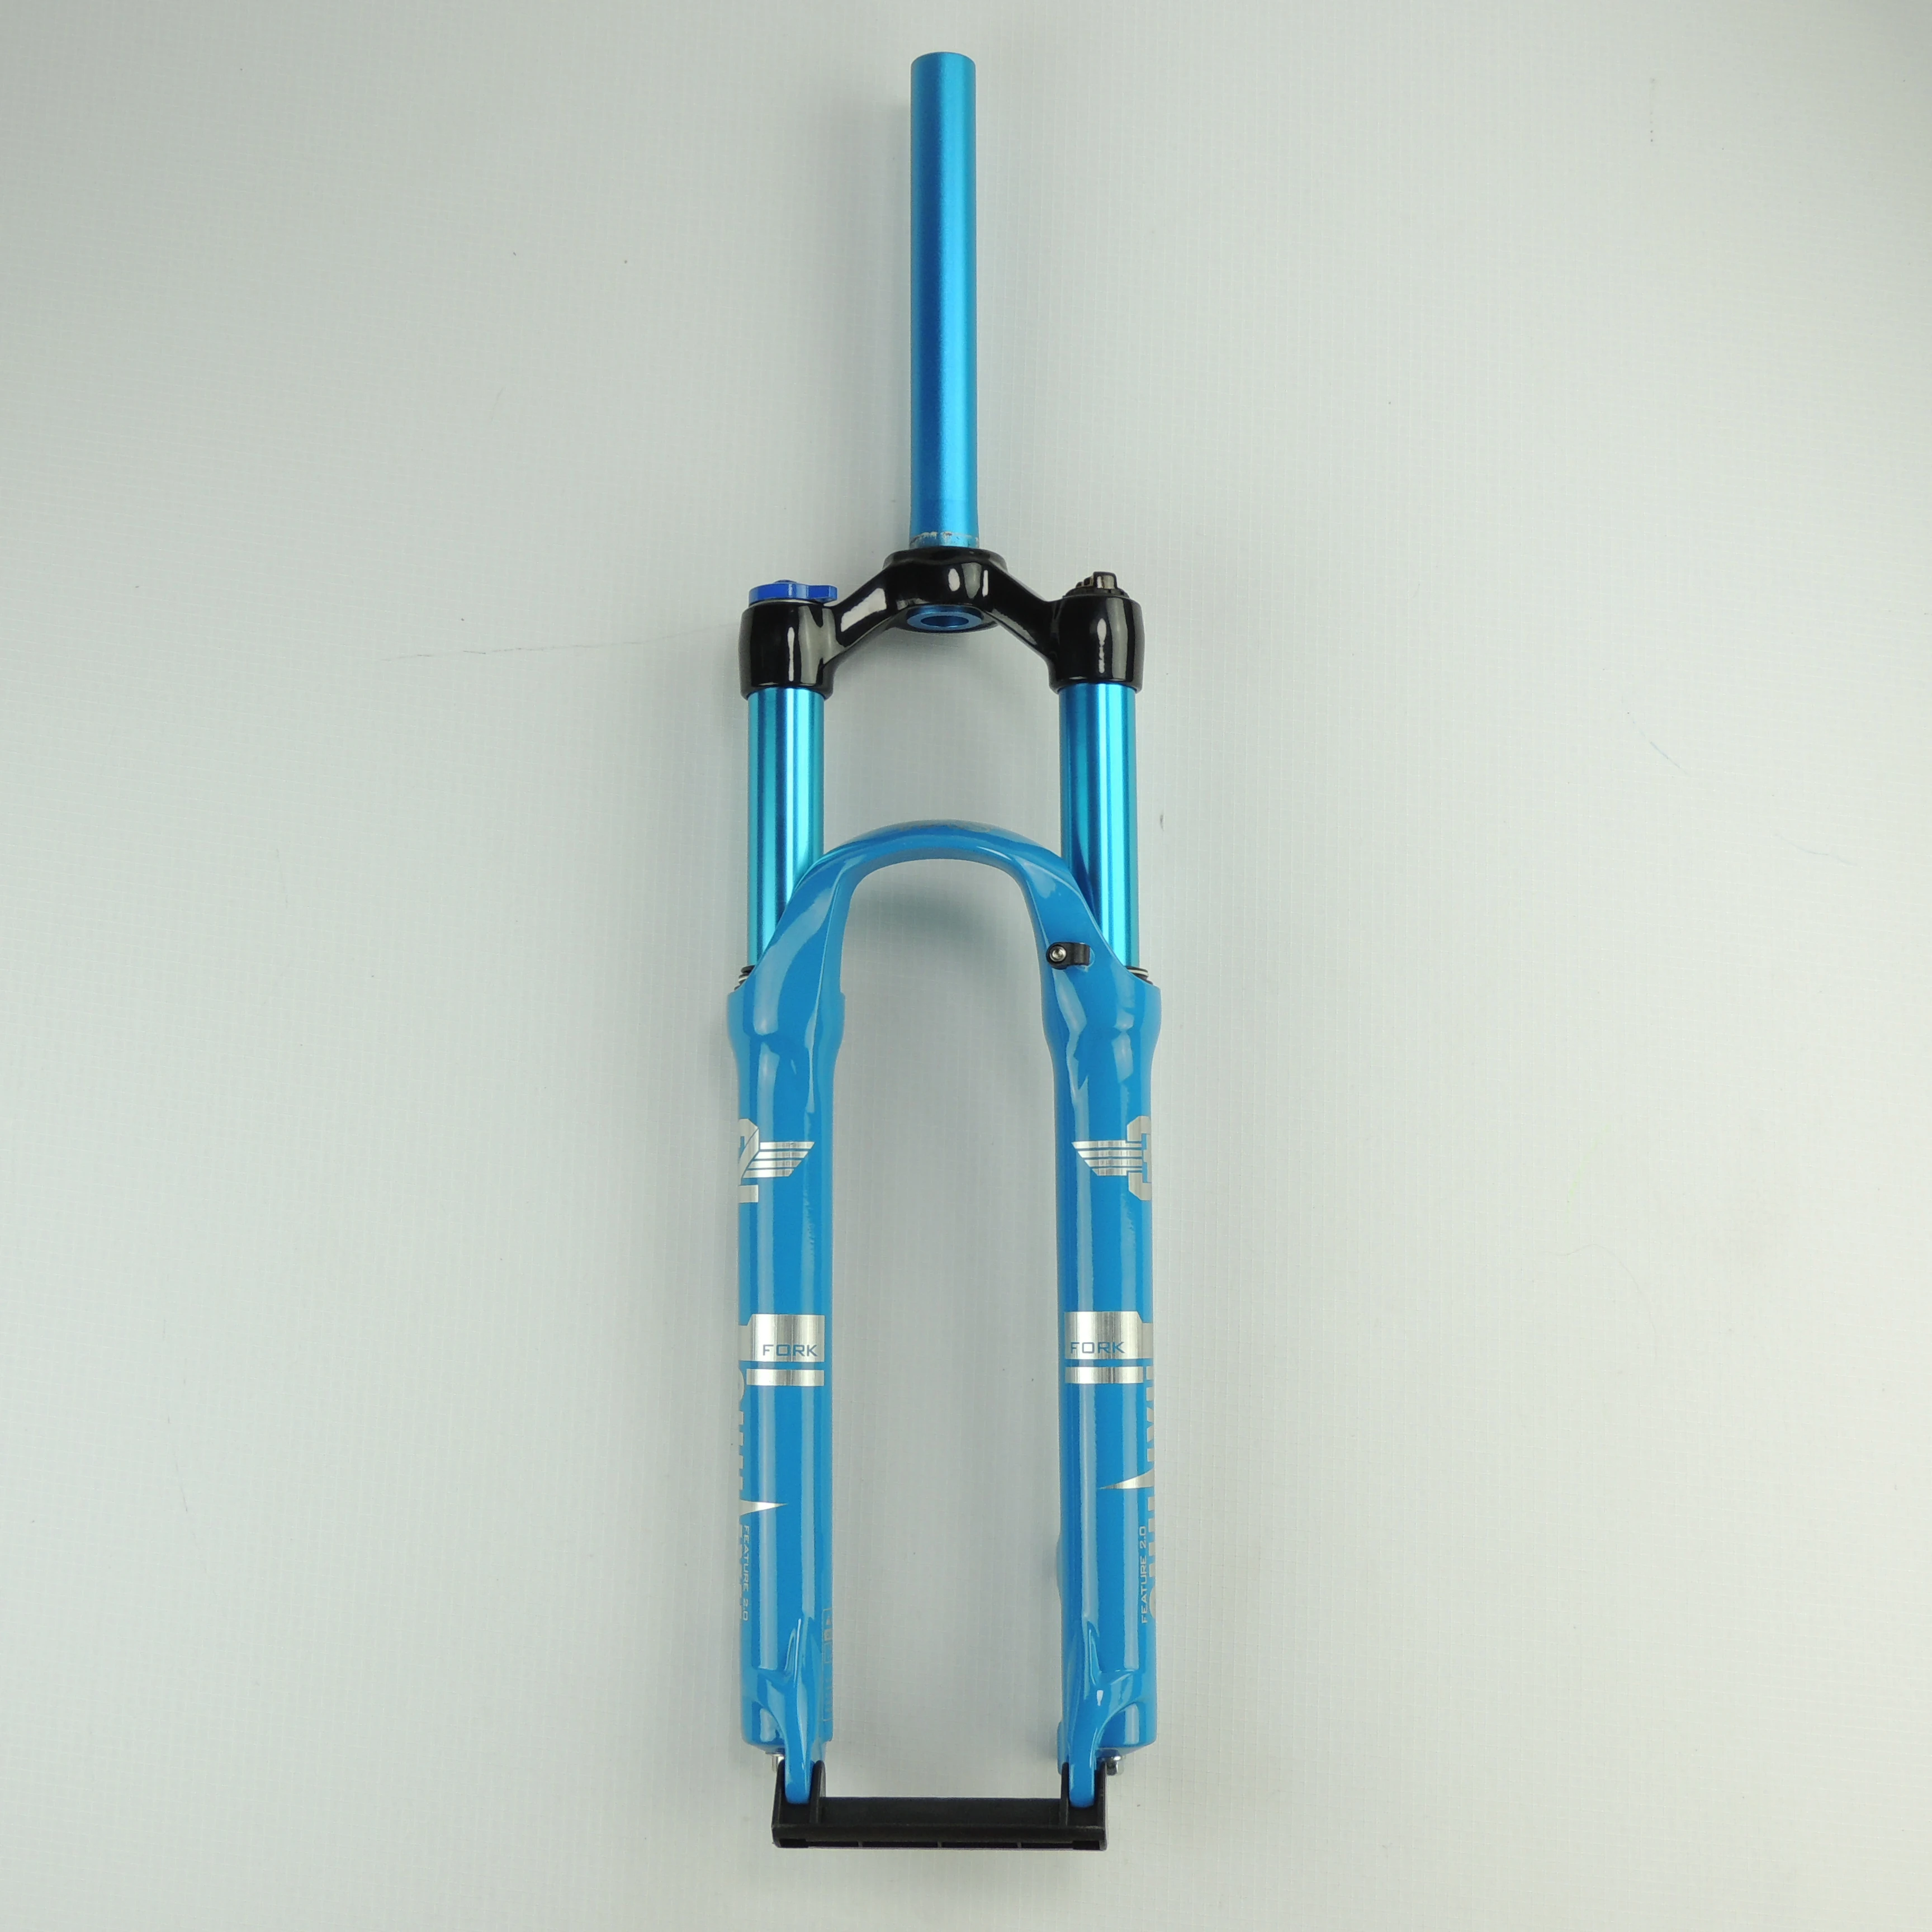 

Mountain bicycle front fork 26/27.5/29 air suspension 32MM 120MM travel 9x100mm QR performance suspension Fork, Black